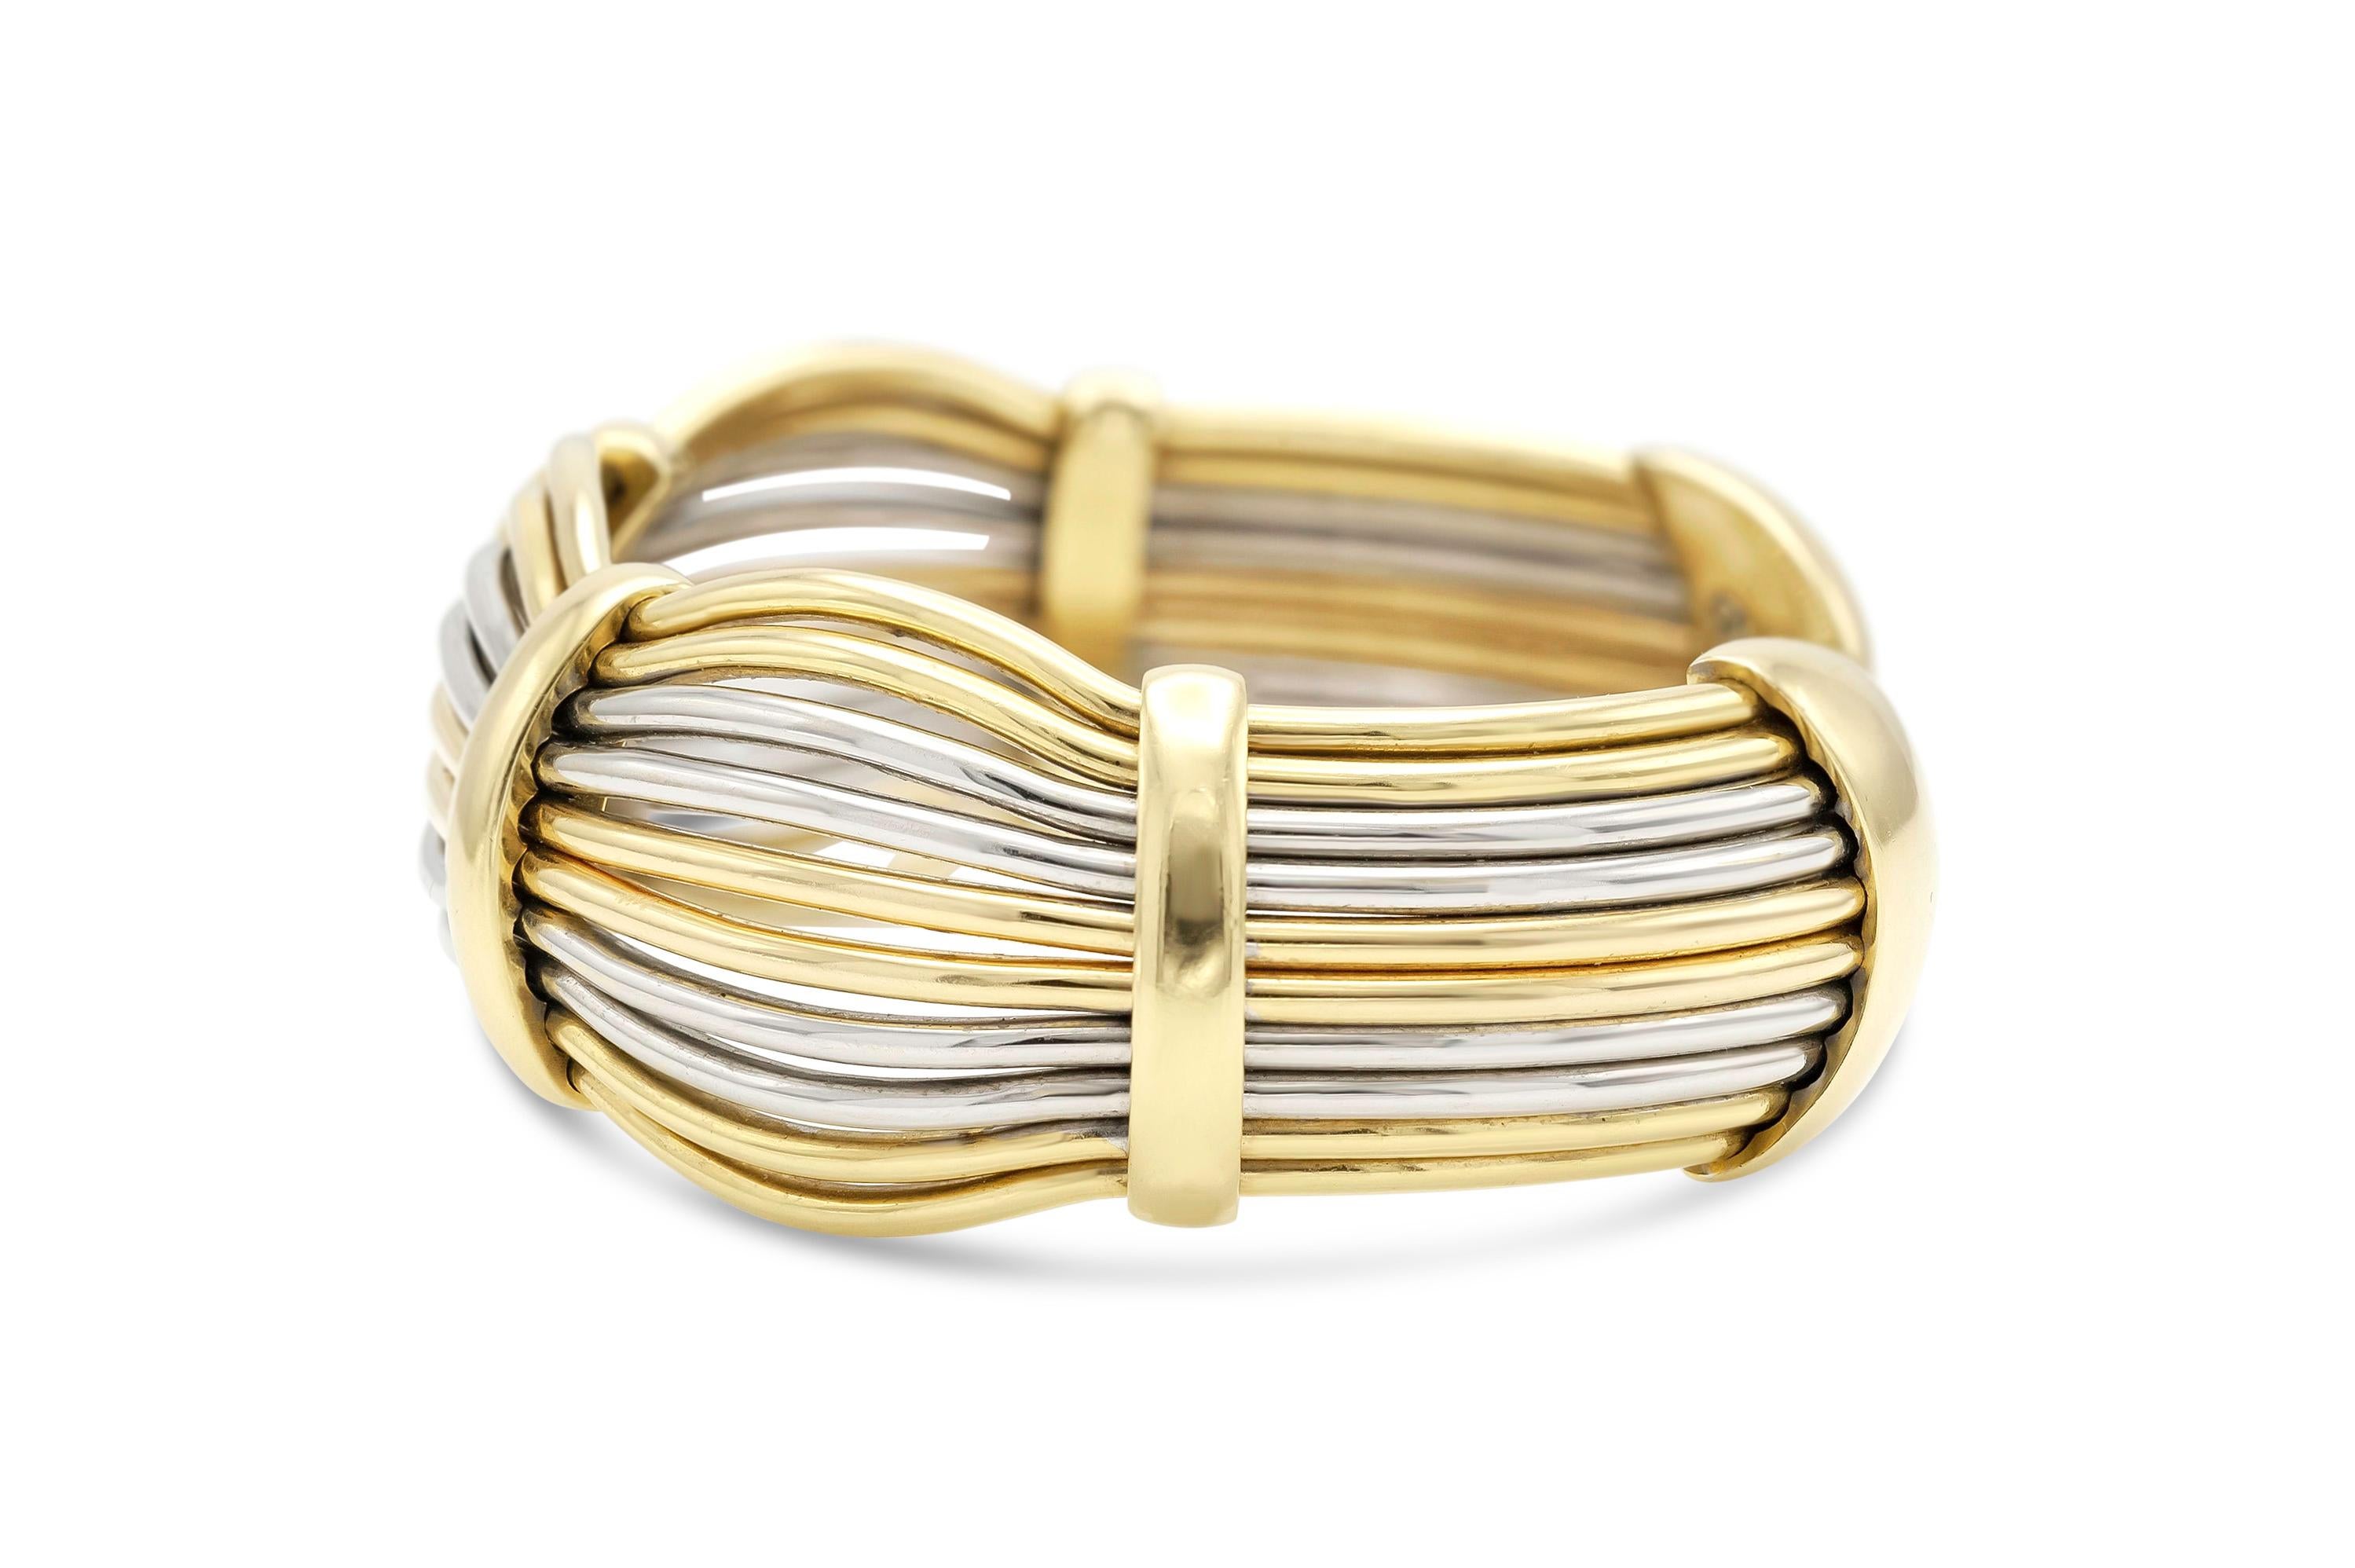 Finely crafted in 18k yellow, white, and rose gold.
Size 6 1/2